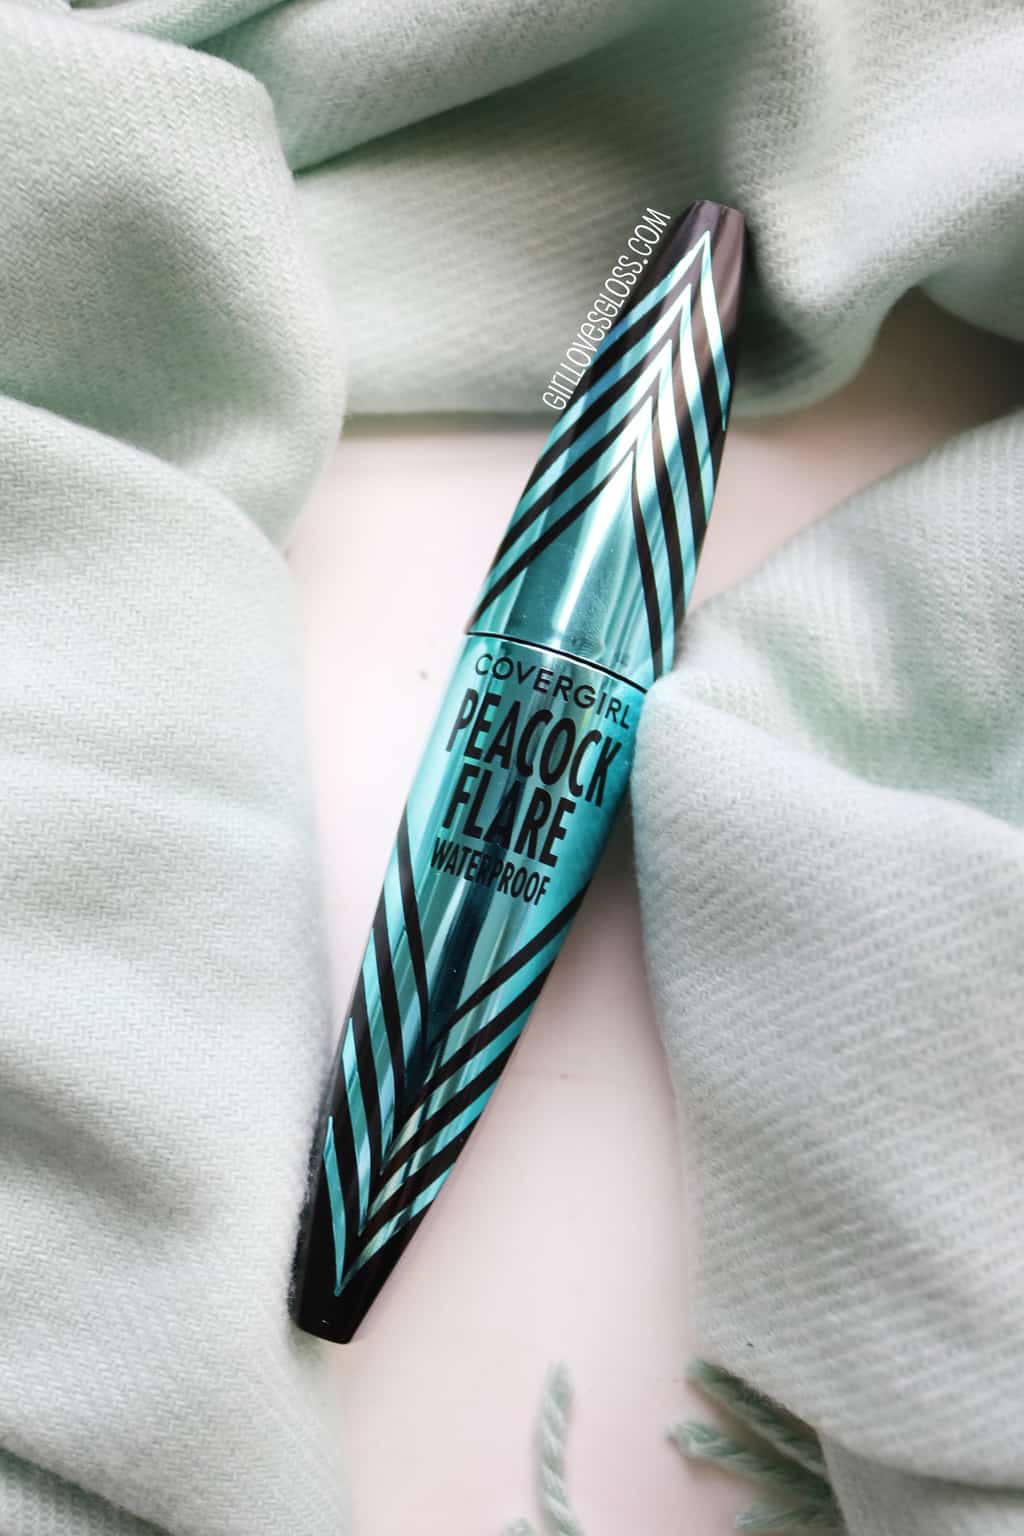 Covergirl Peacock Flare Mascara Review